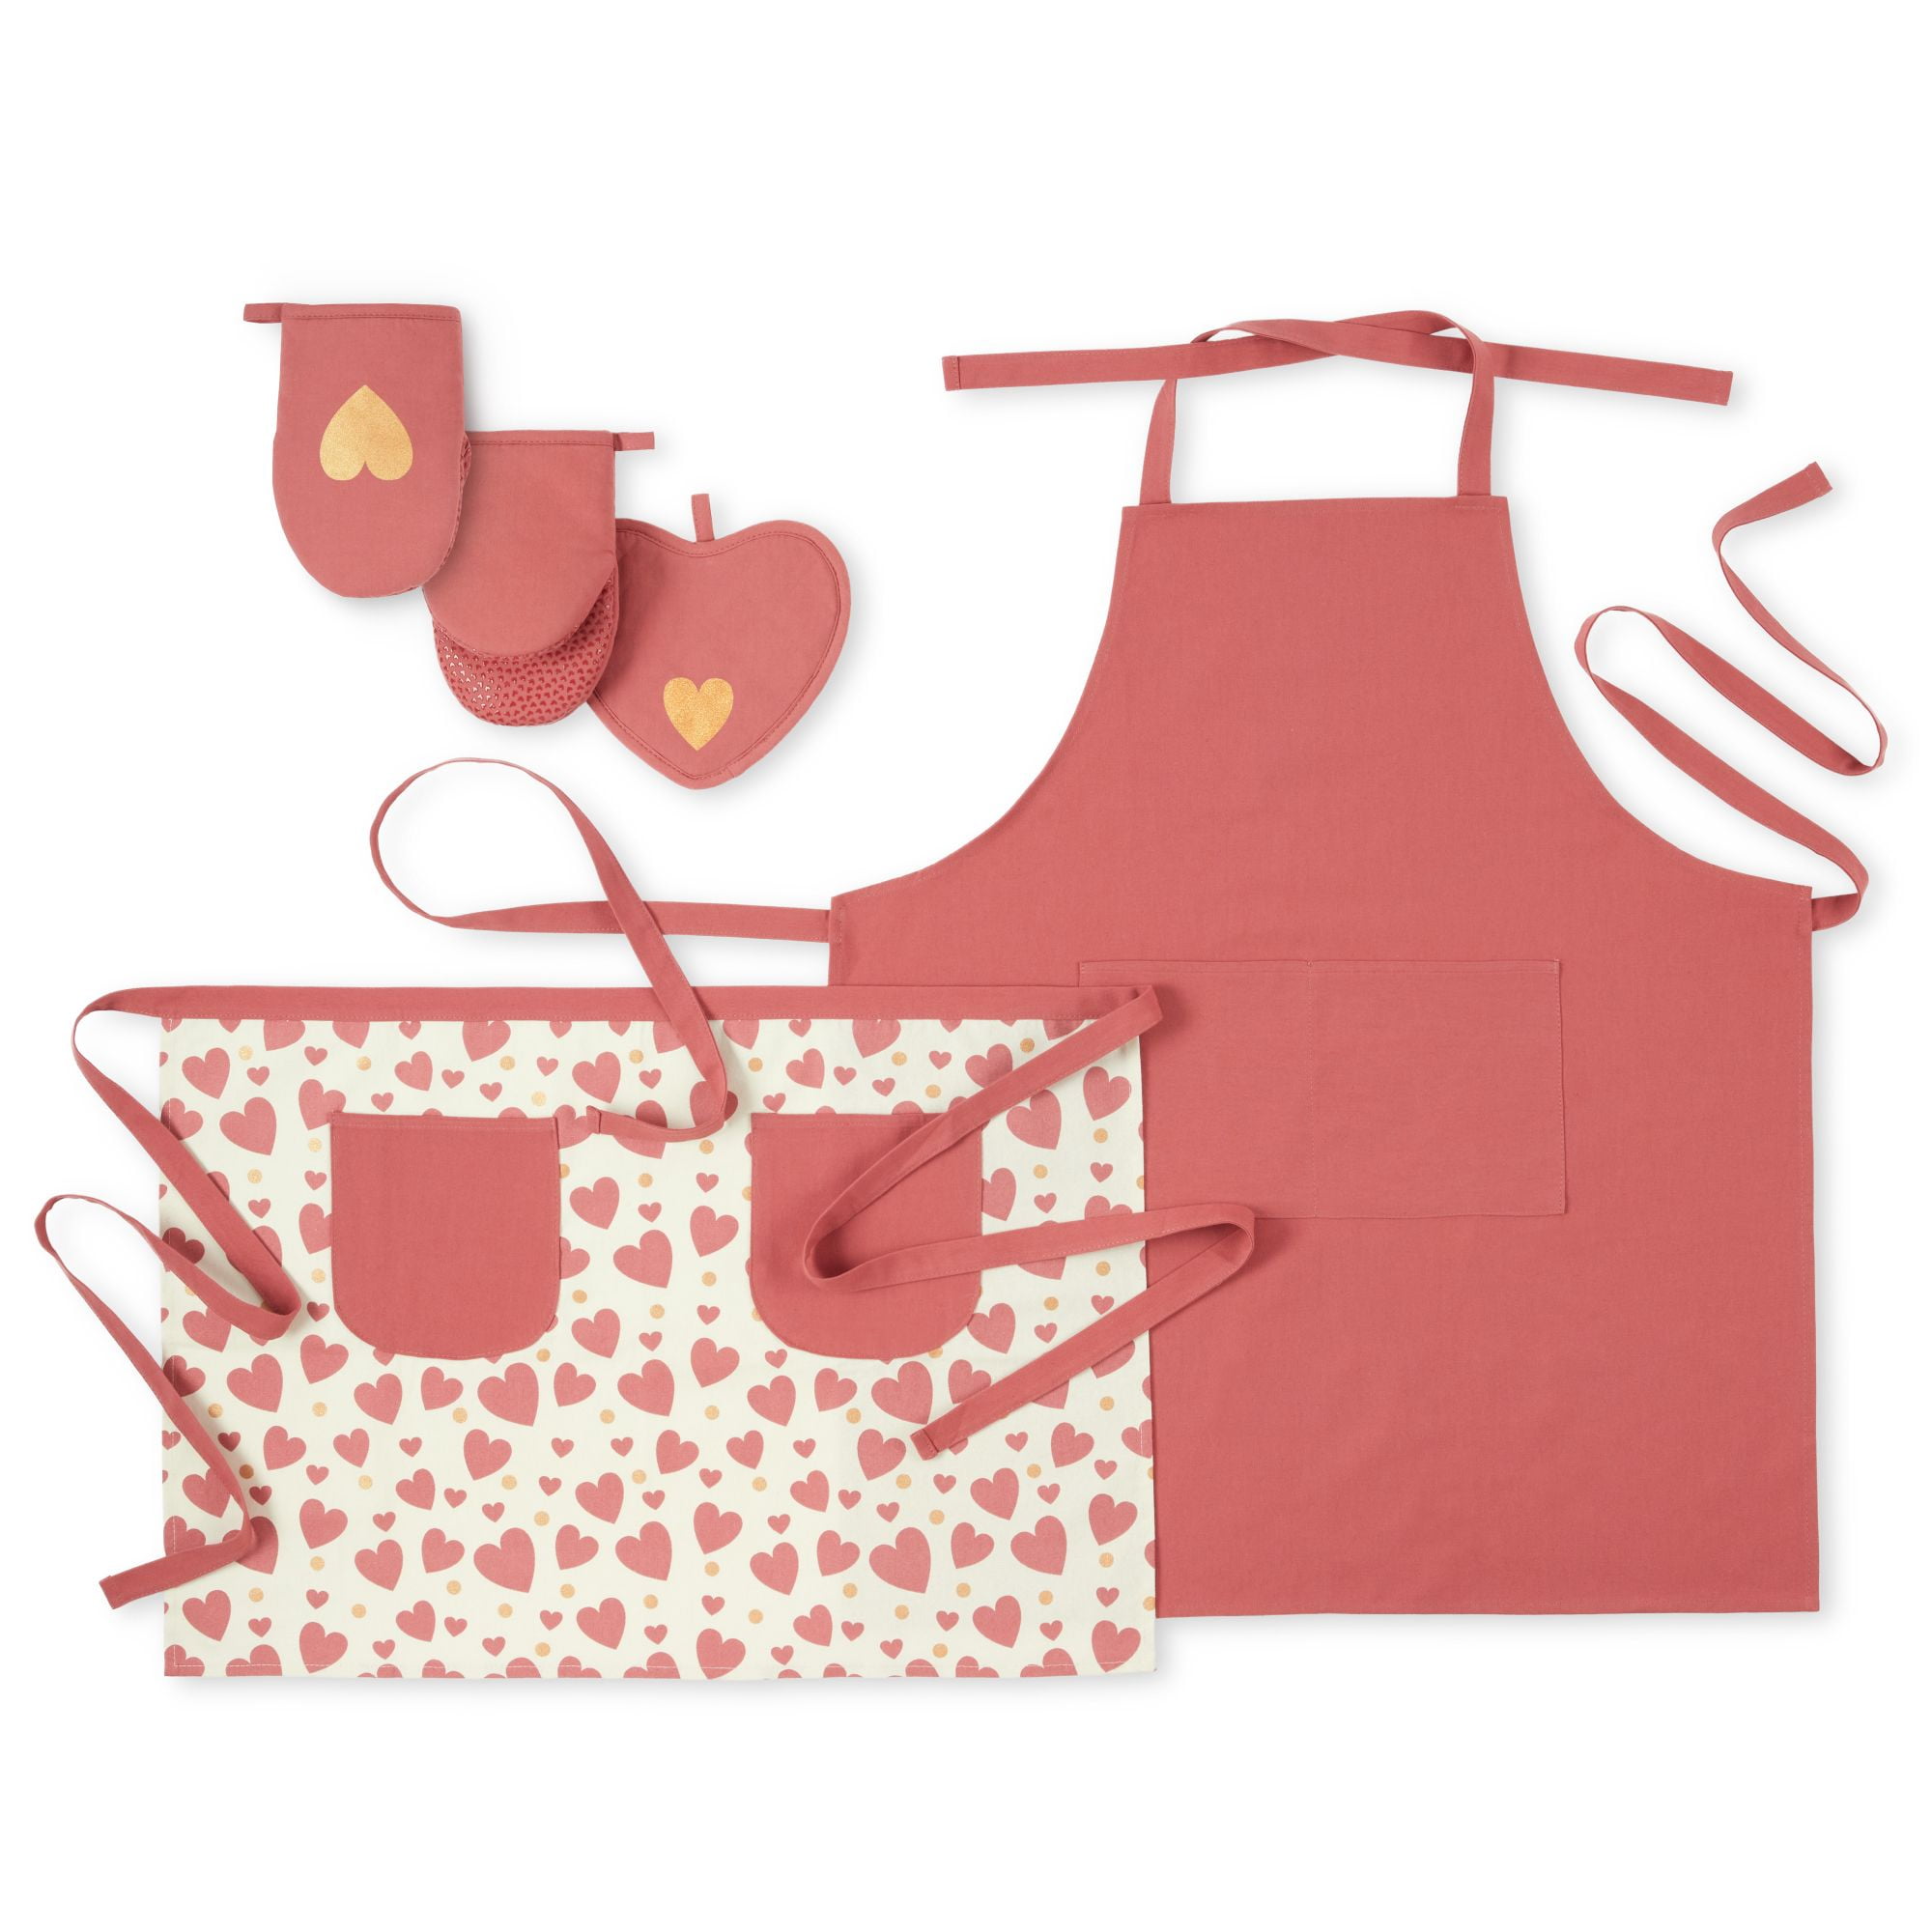 WC-WAY TO CELEBRATE Way To Celebrate Metallic Hearts Cooking for Two Apron, Pot Holder, and Mini Mitt Set, 5 Pieces